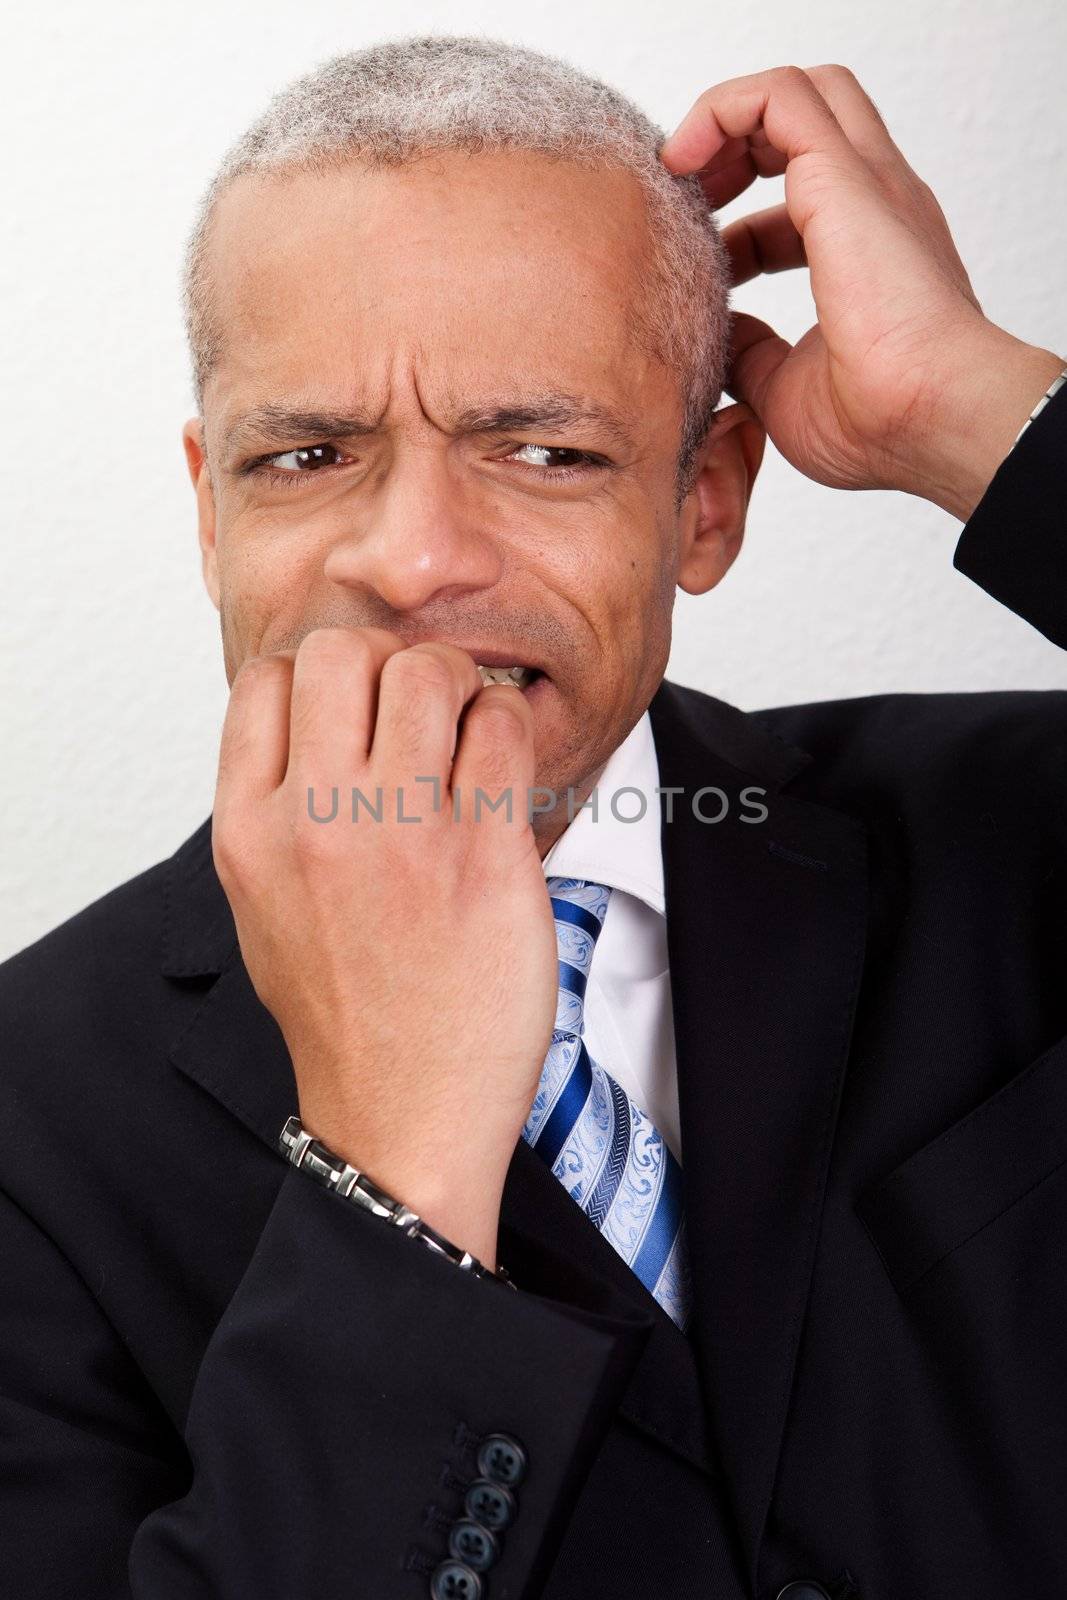 Stressed Businessman Biting His Nails And Scratching His Head